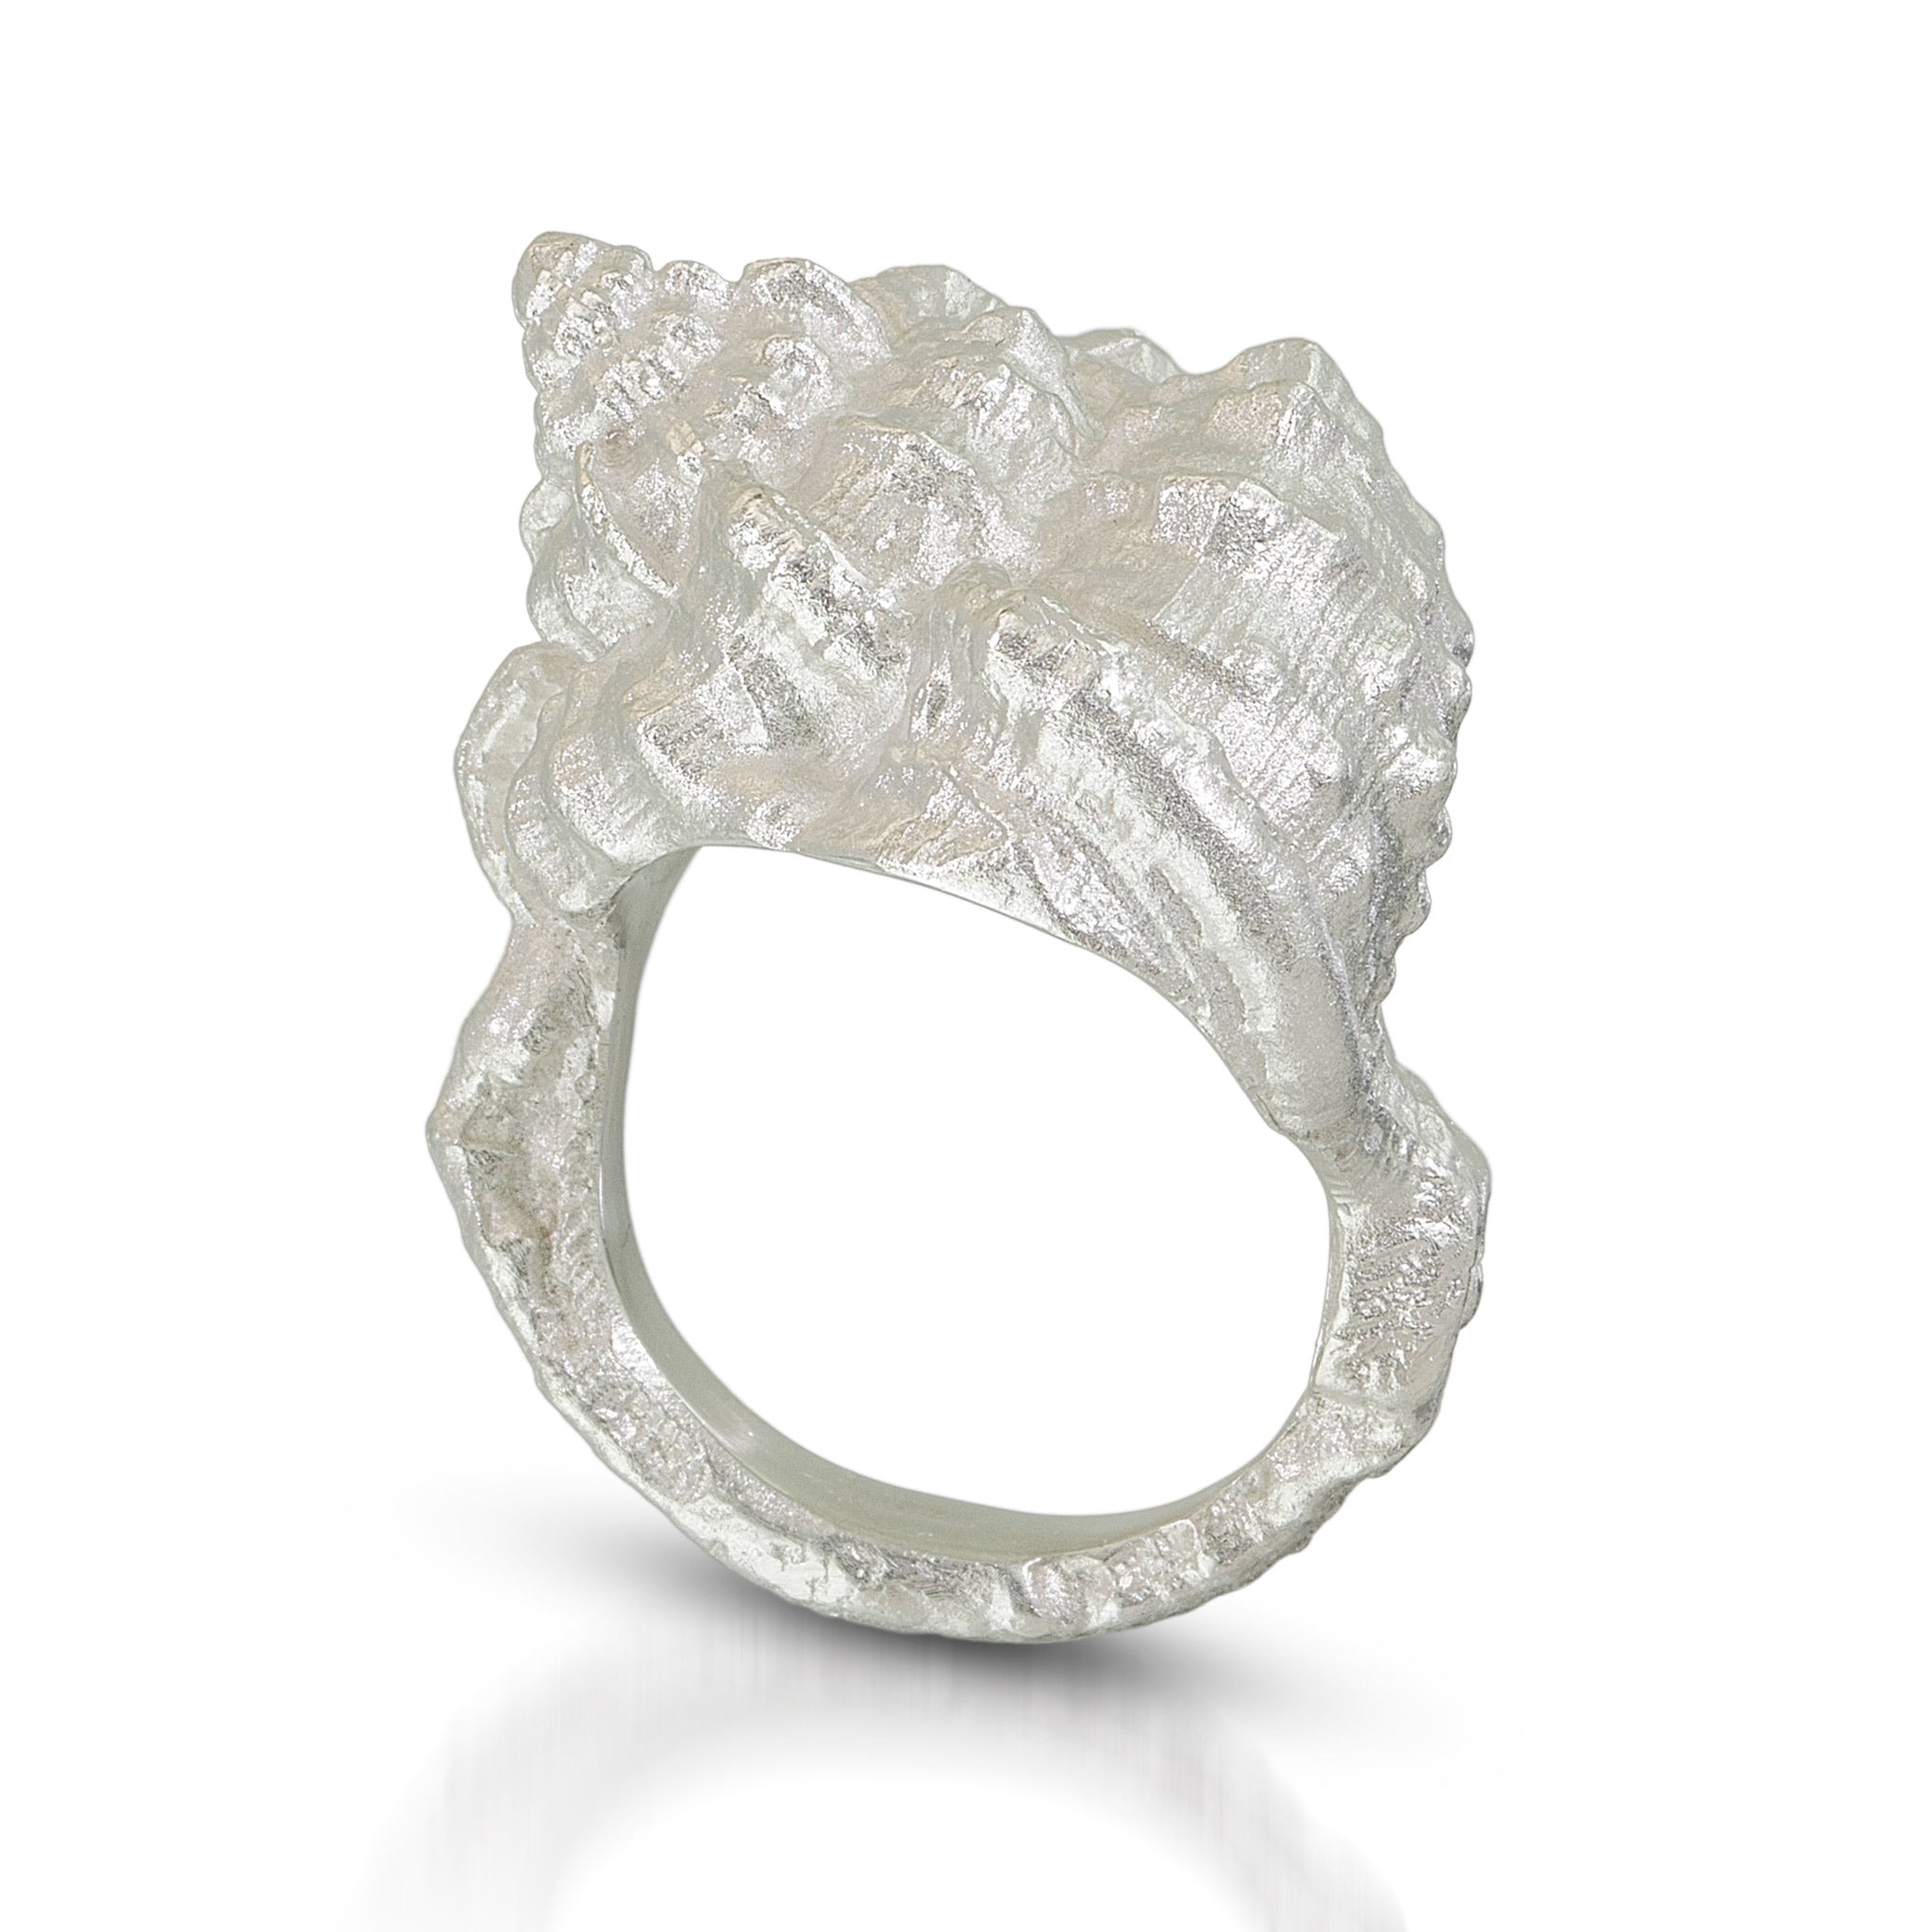 The Sea Shell Ring molded from a sea shell 6.5